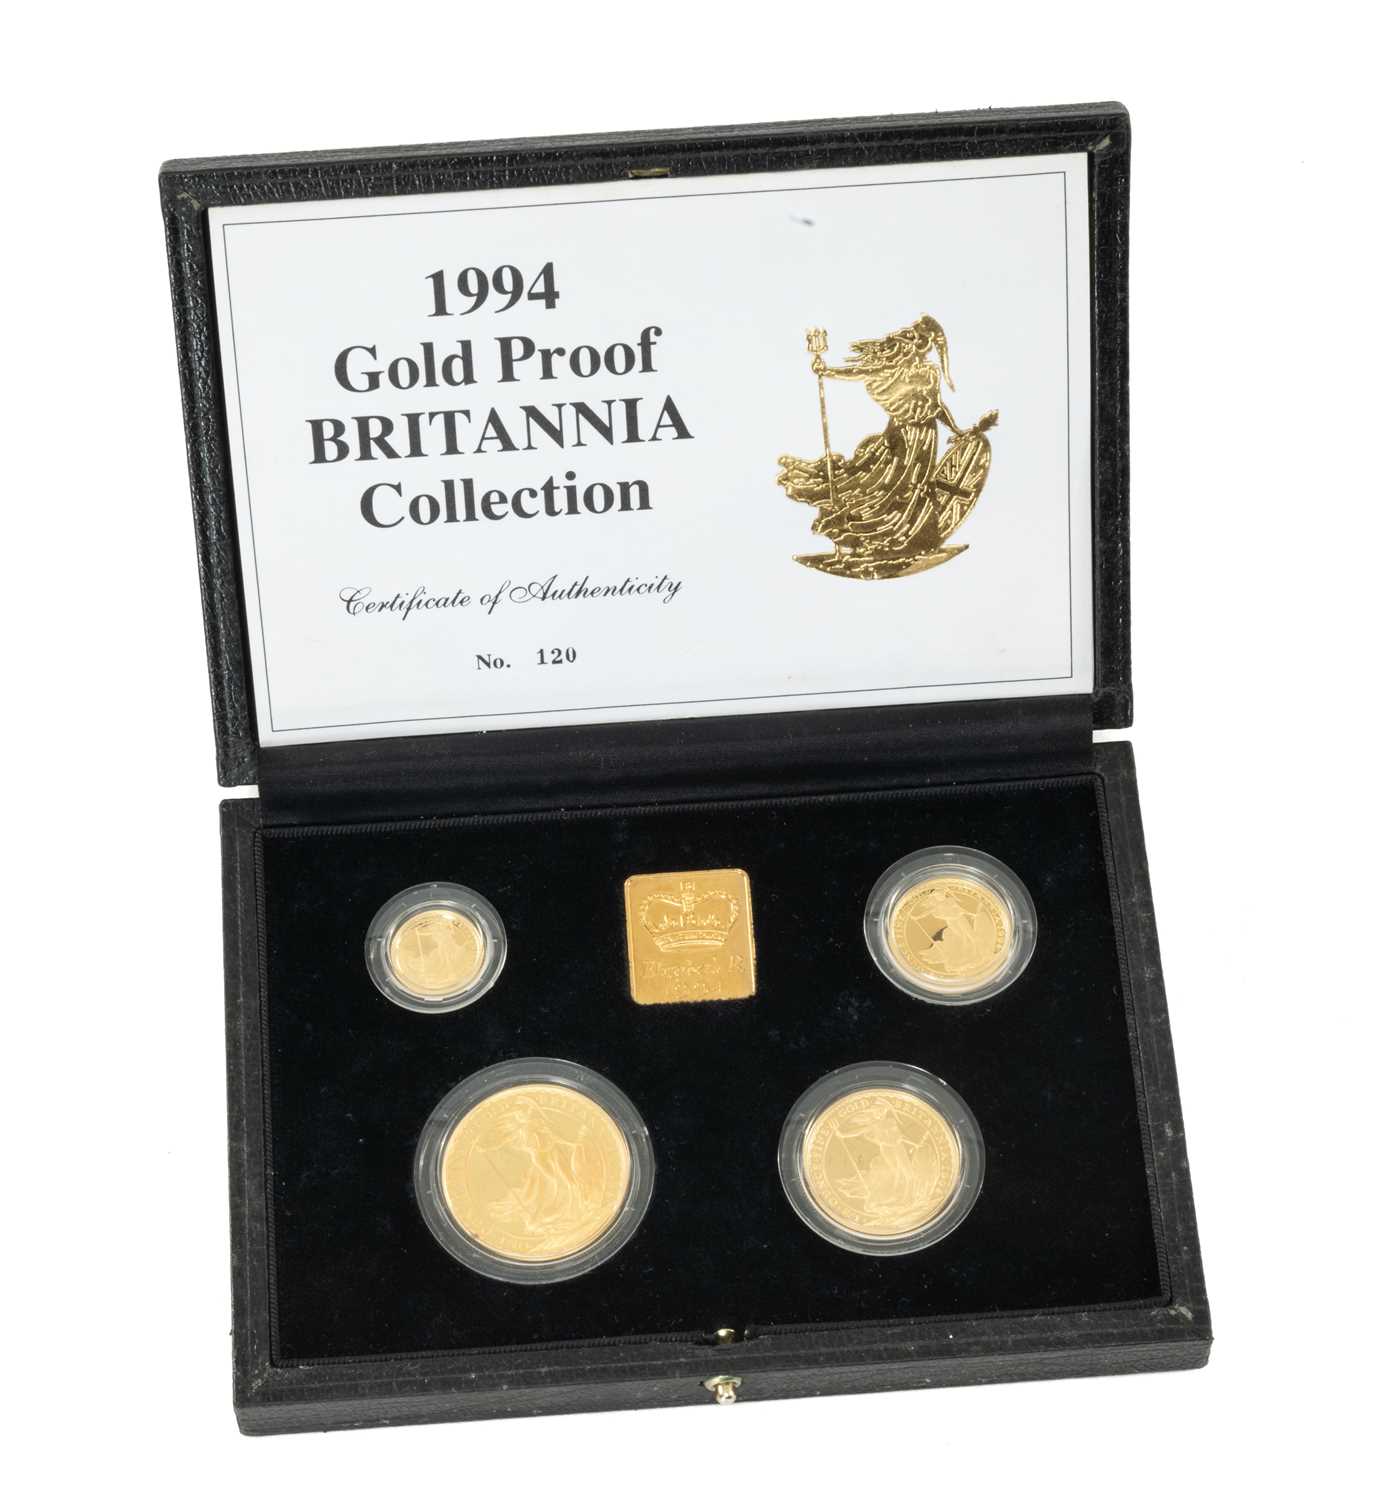 ROYAL MINT 1994 GOLD PROOF BRITANNIA COLLECTION, Limited Edition (120/500), comprising £100, £50, £